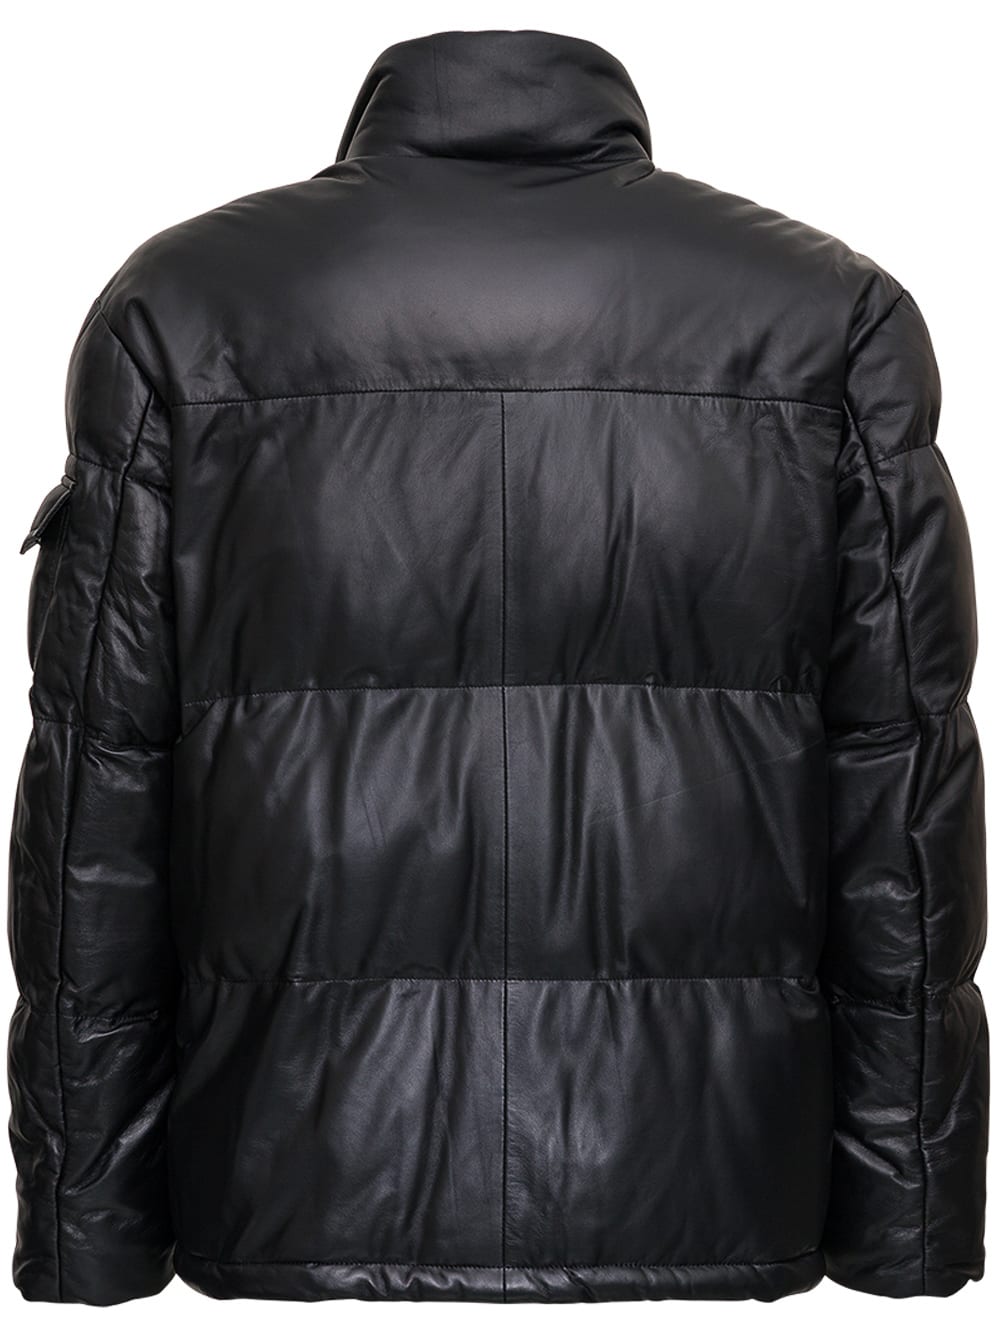 ARMA Black Quilted Leather Down Jacket